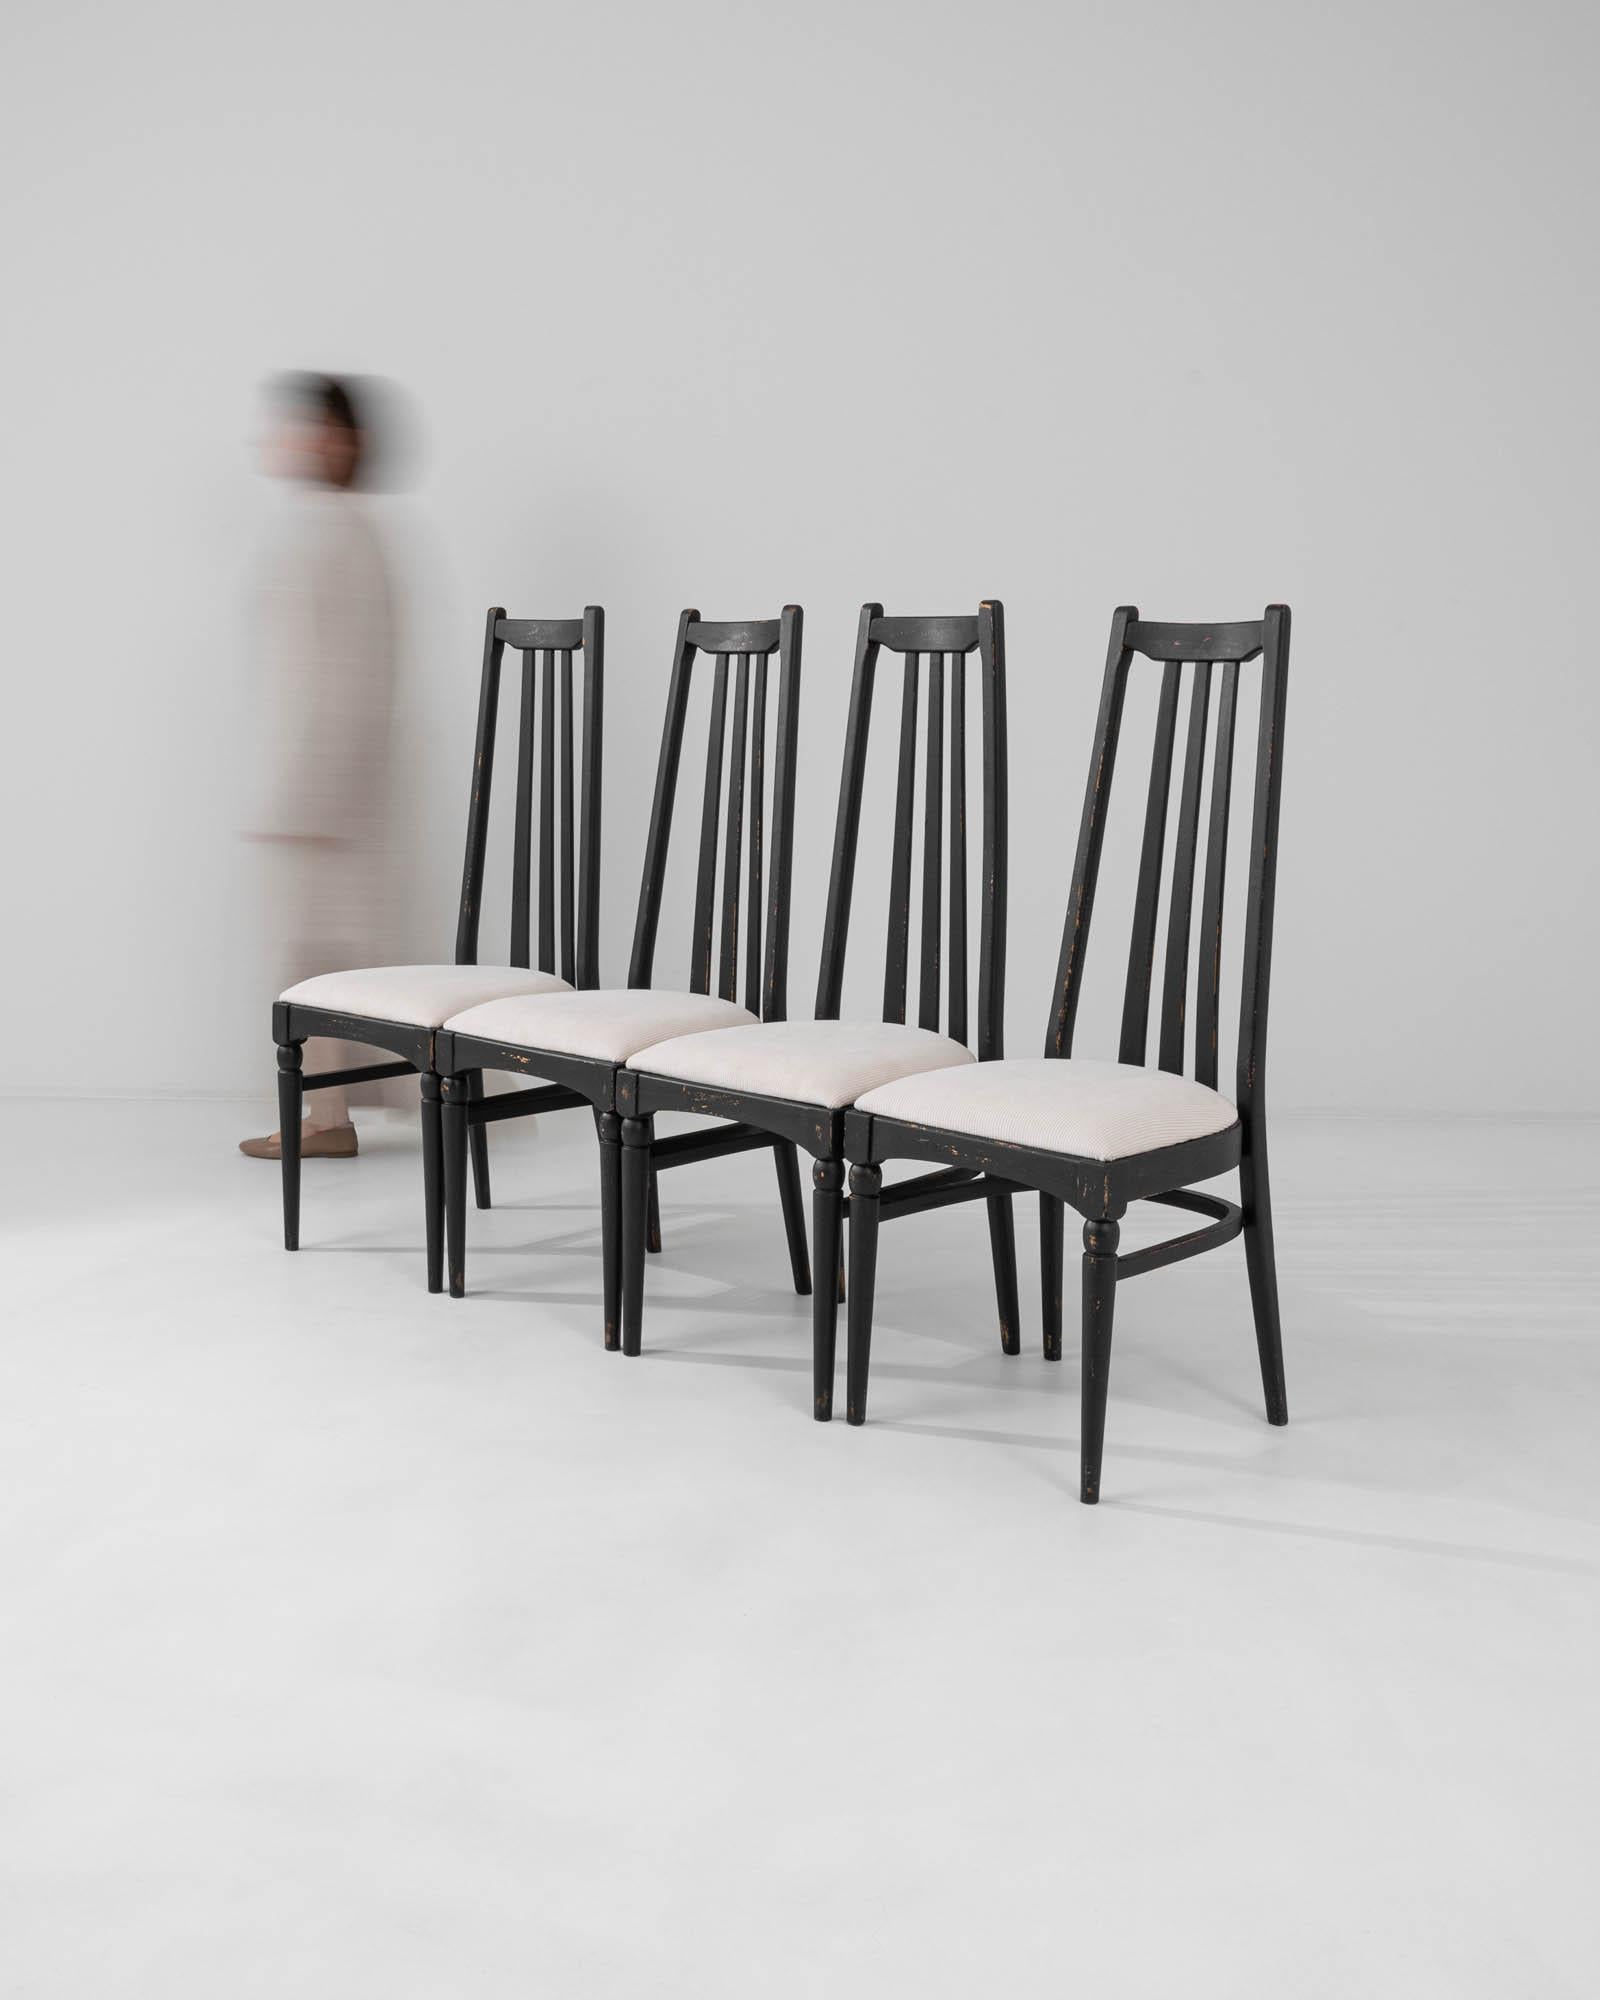 This set of four dining chairs, produced circa 1960 in Czechia, exudes a hint of gothic allure combined with mid-century modern style. The tall black backs, topped with minimalist finials resembling ears, and the sleek tapered legs, adorned with